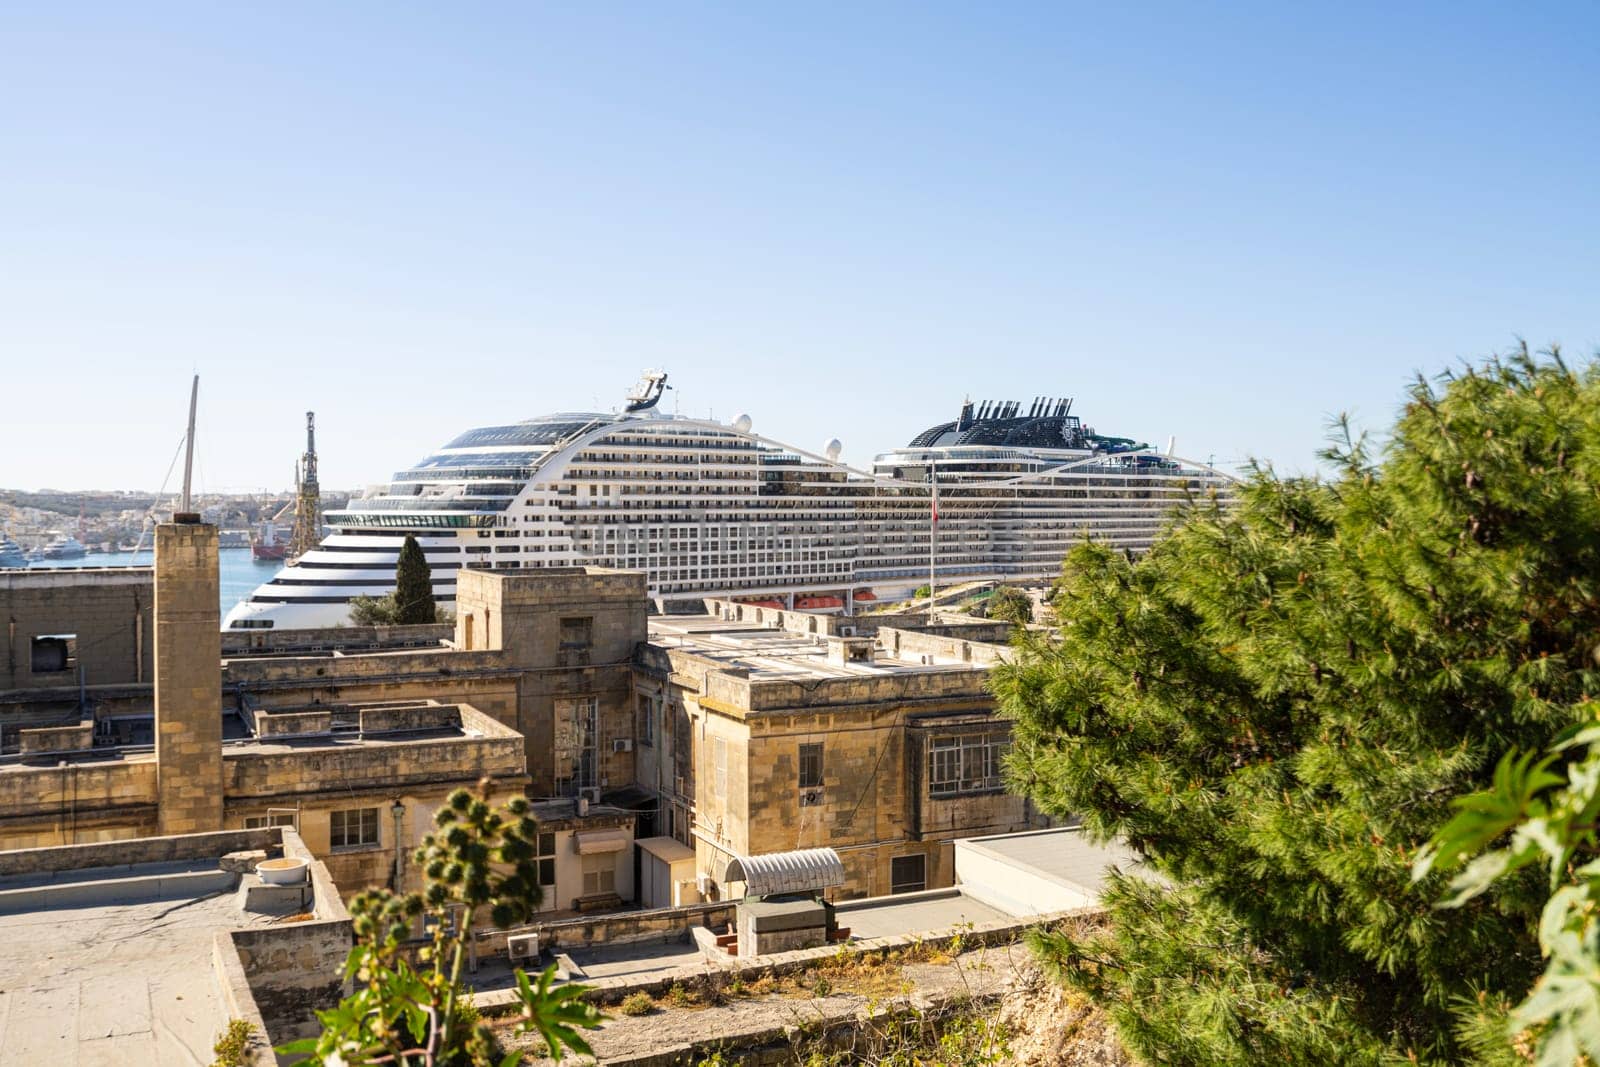 a large cruise ship glimpsed in Valletta, Malta by sergiodv